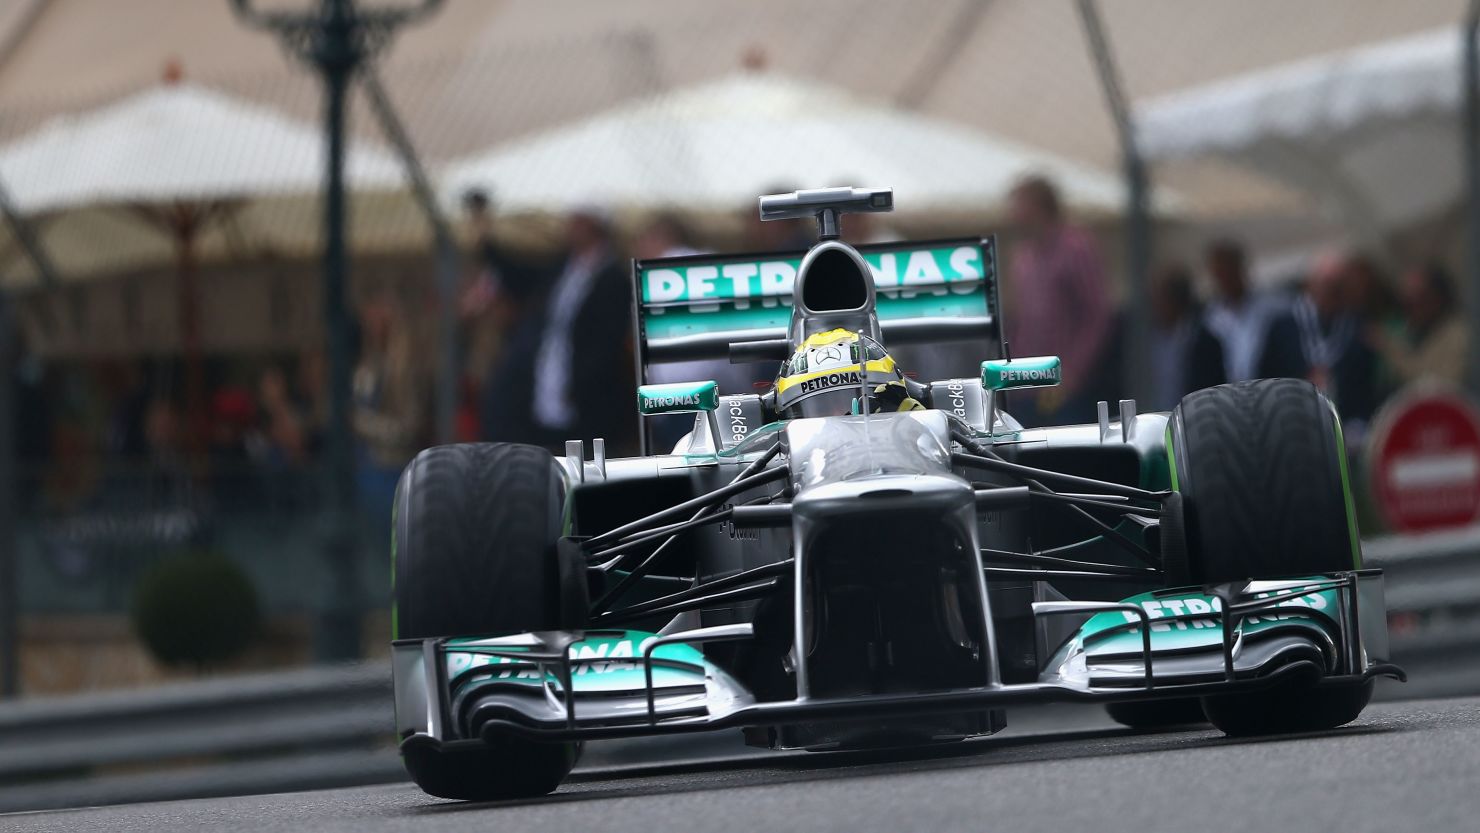 Mercedes currently sit third in the constructors' championship behind Ferrari and Red Bull.